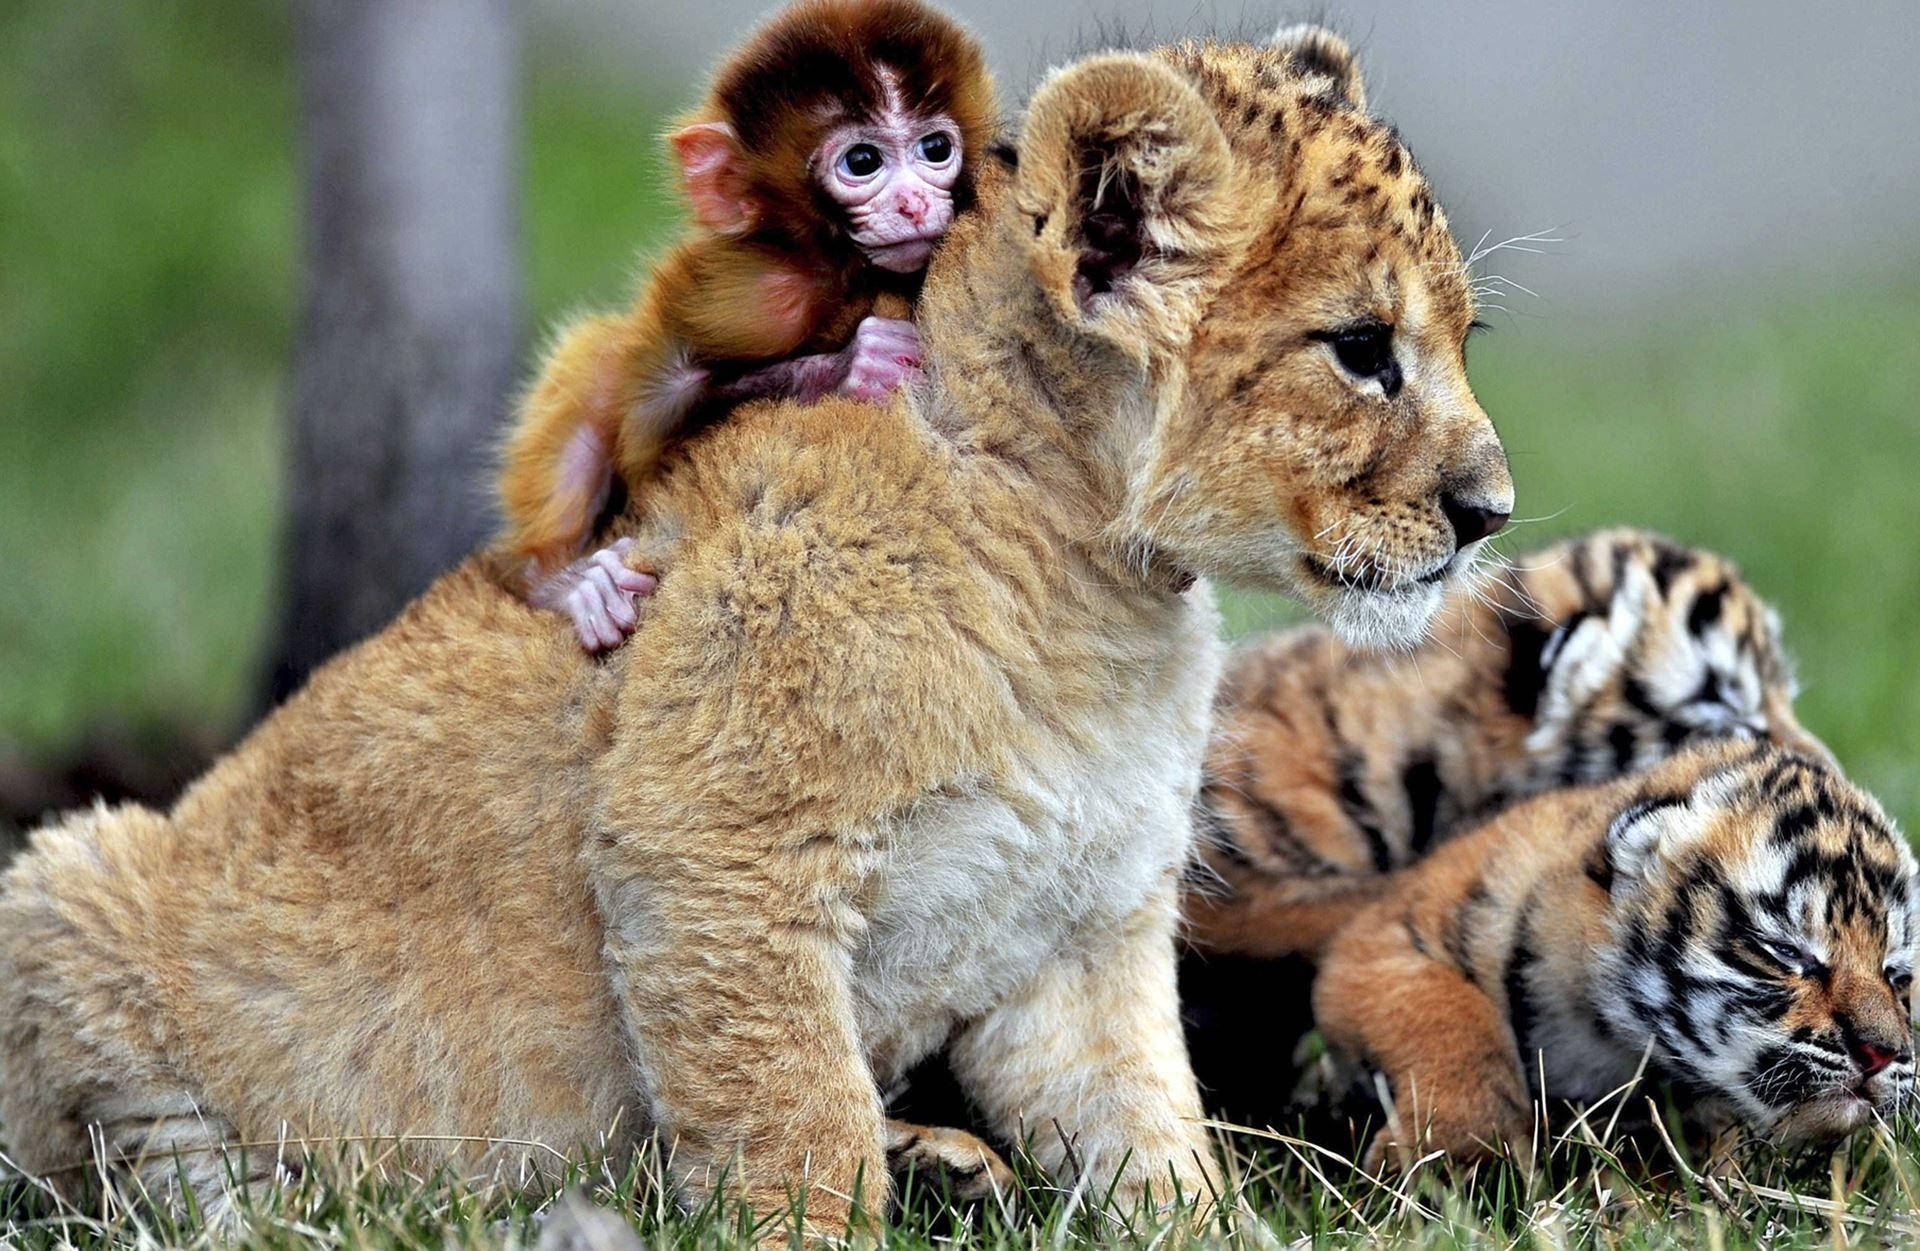 Baby Monkey And Lion Cub